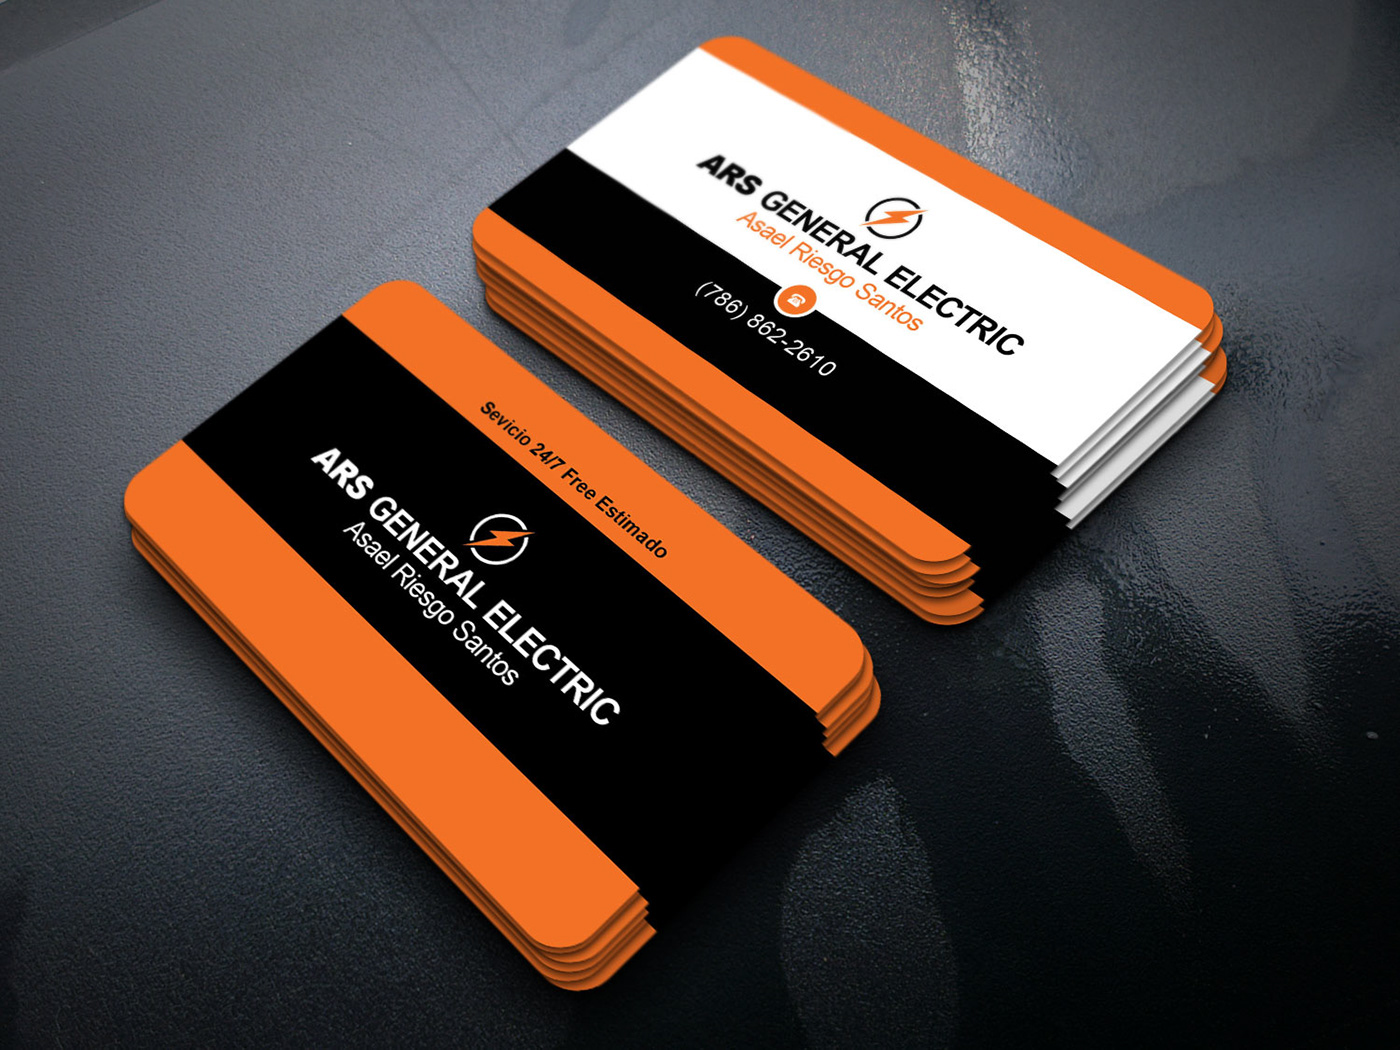 ars ars general electric black business card business card Business card design corprorate business card electic business card simple business card Stationery unique business card